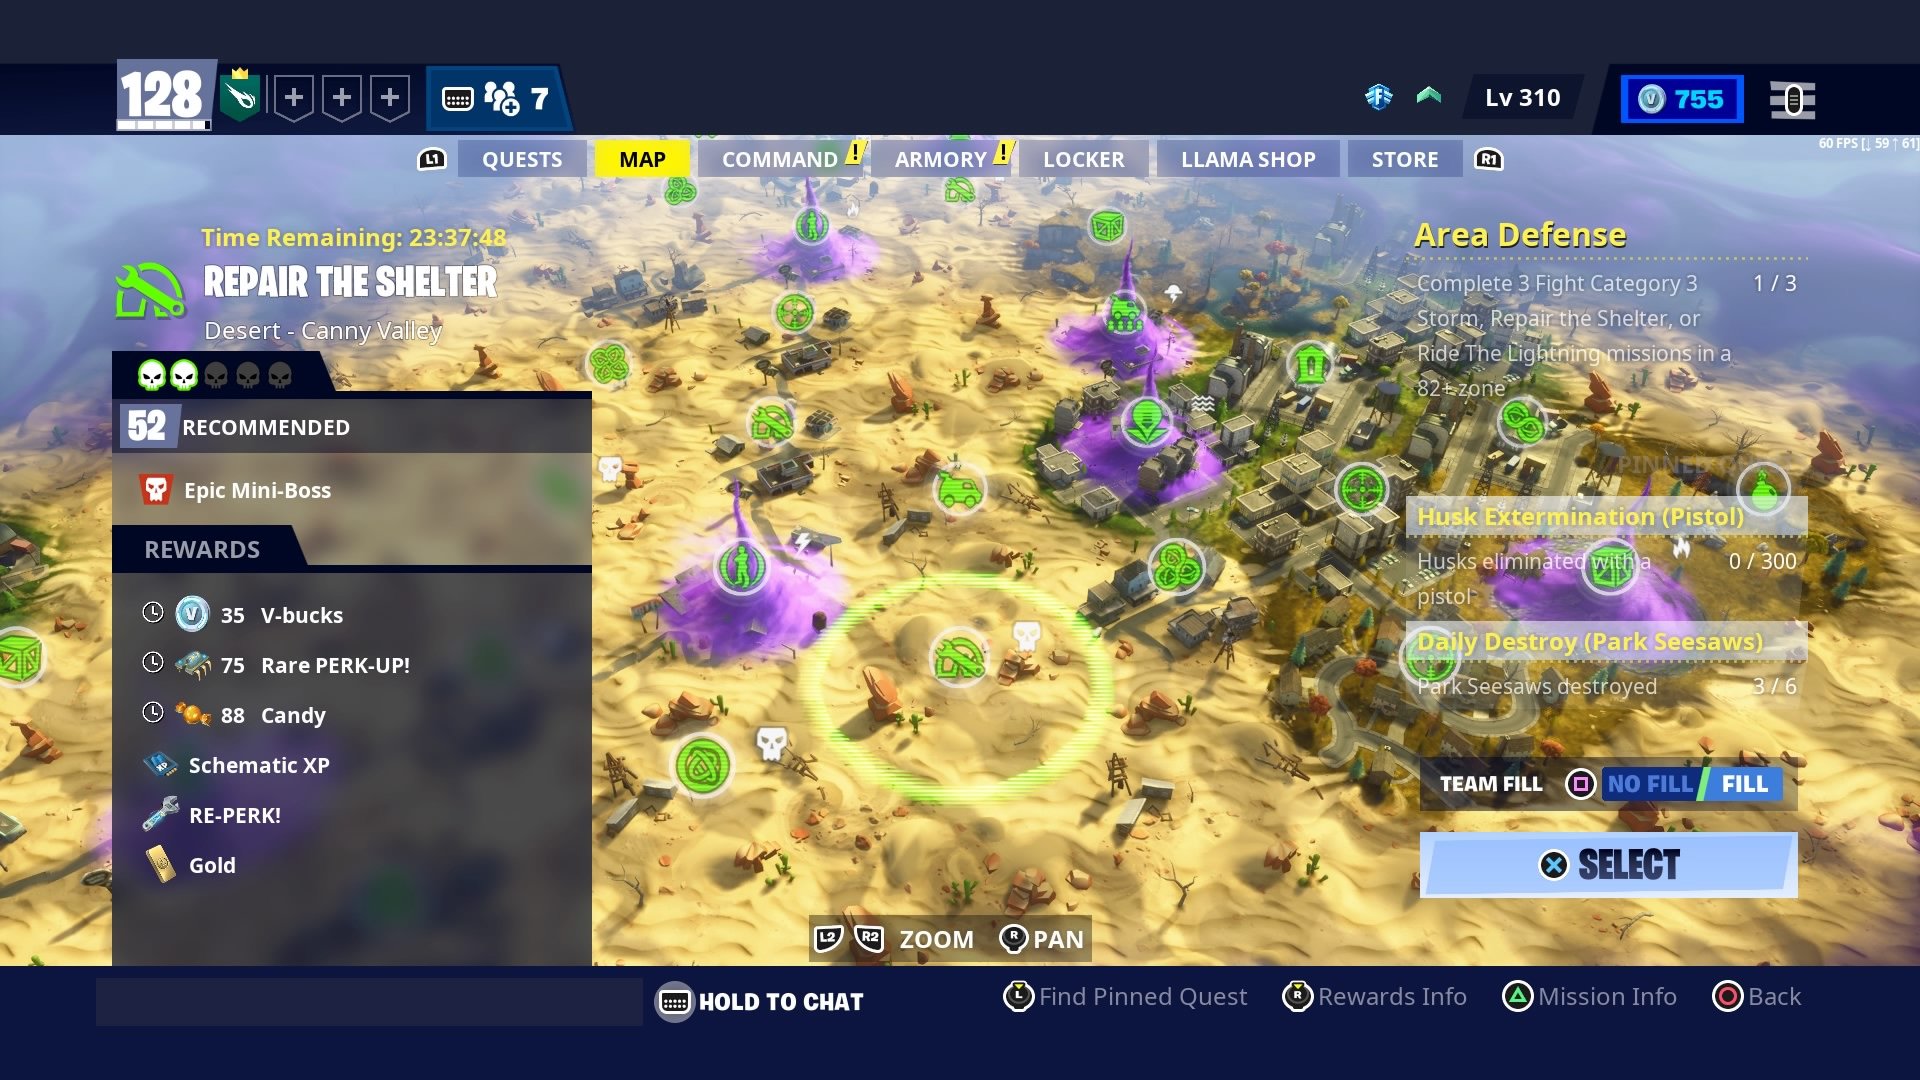 Timed Missions tracking in Fortnite StW - Free the V-Bucks